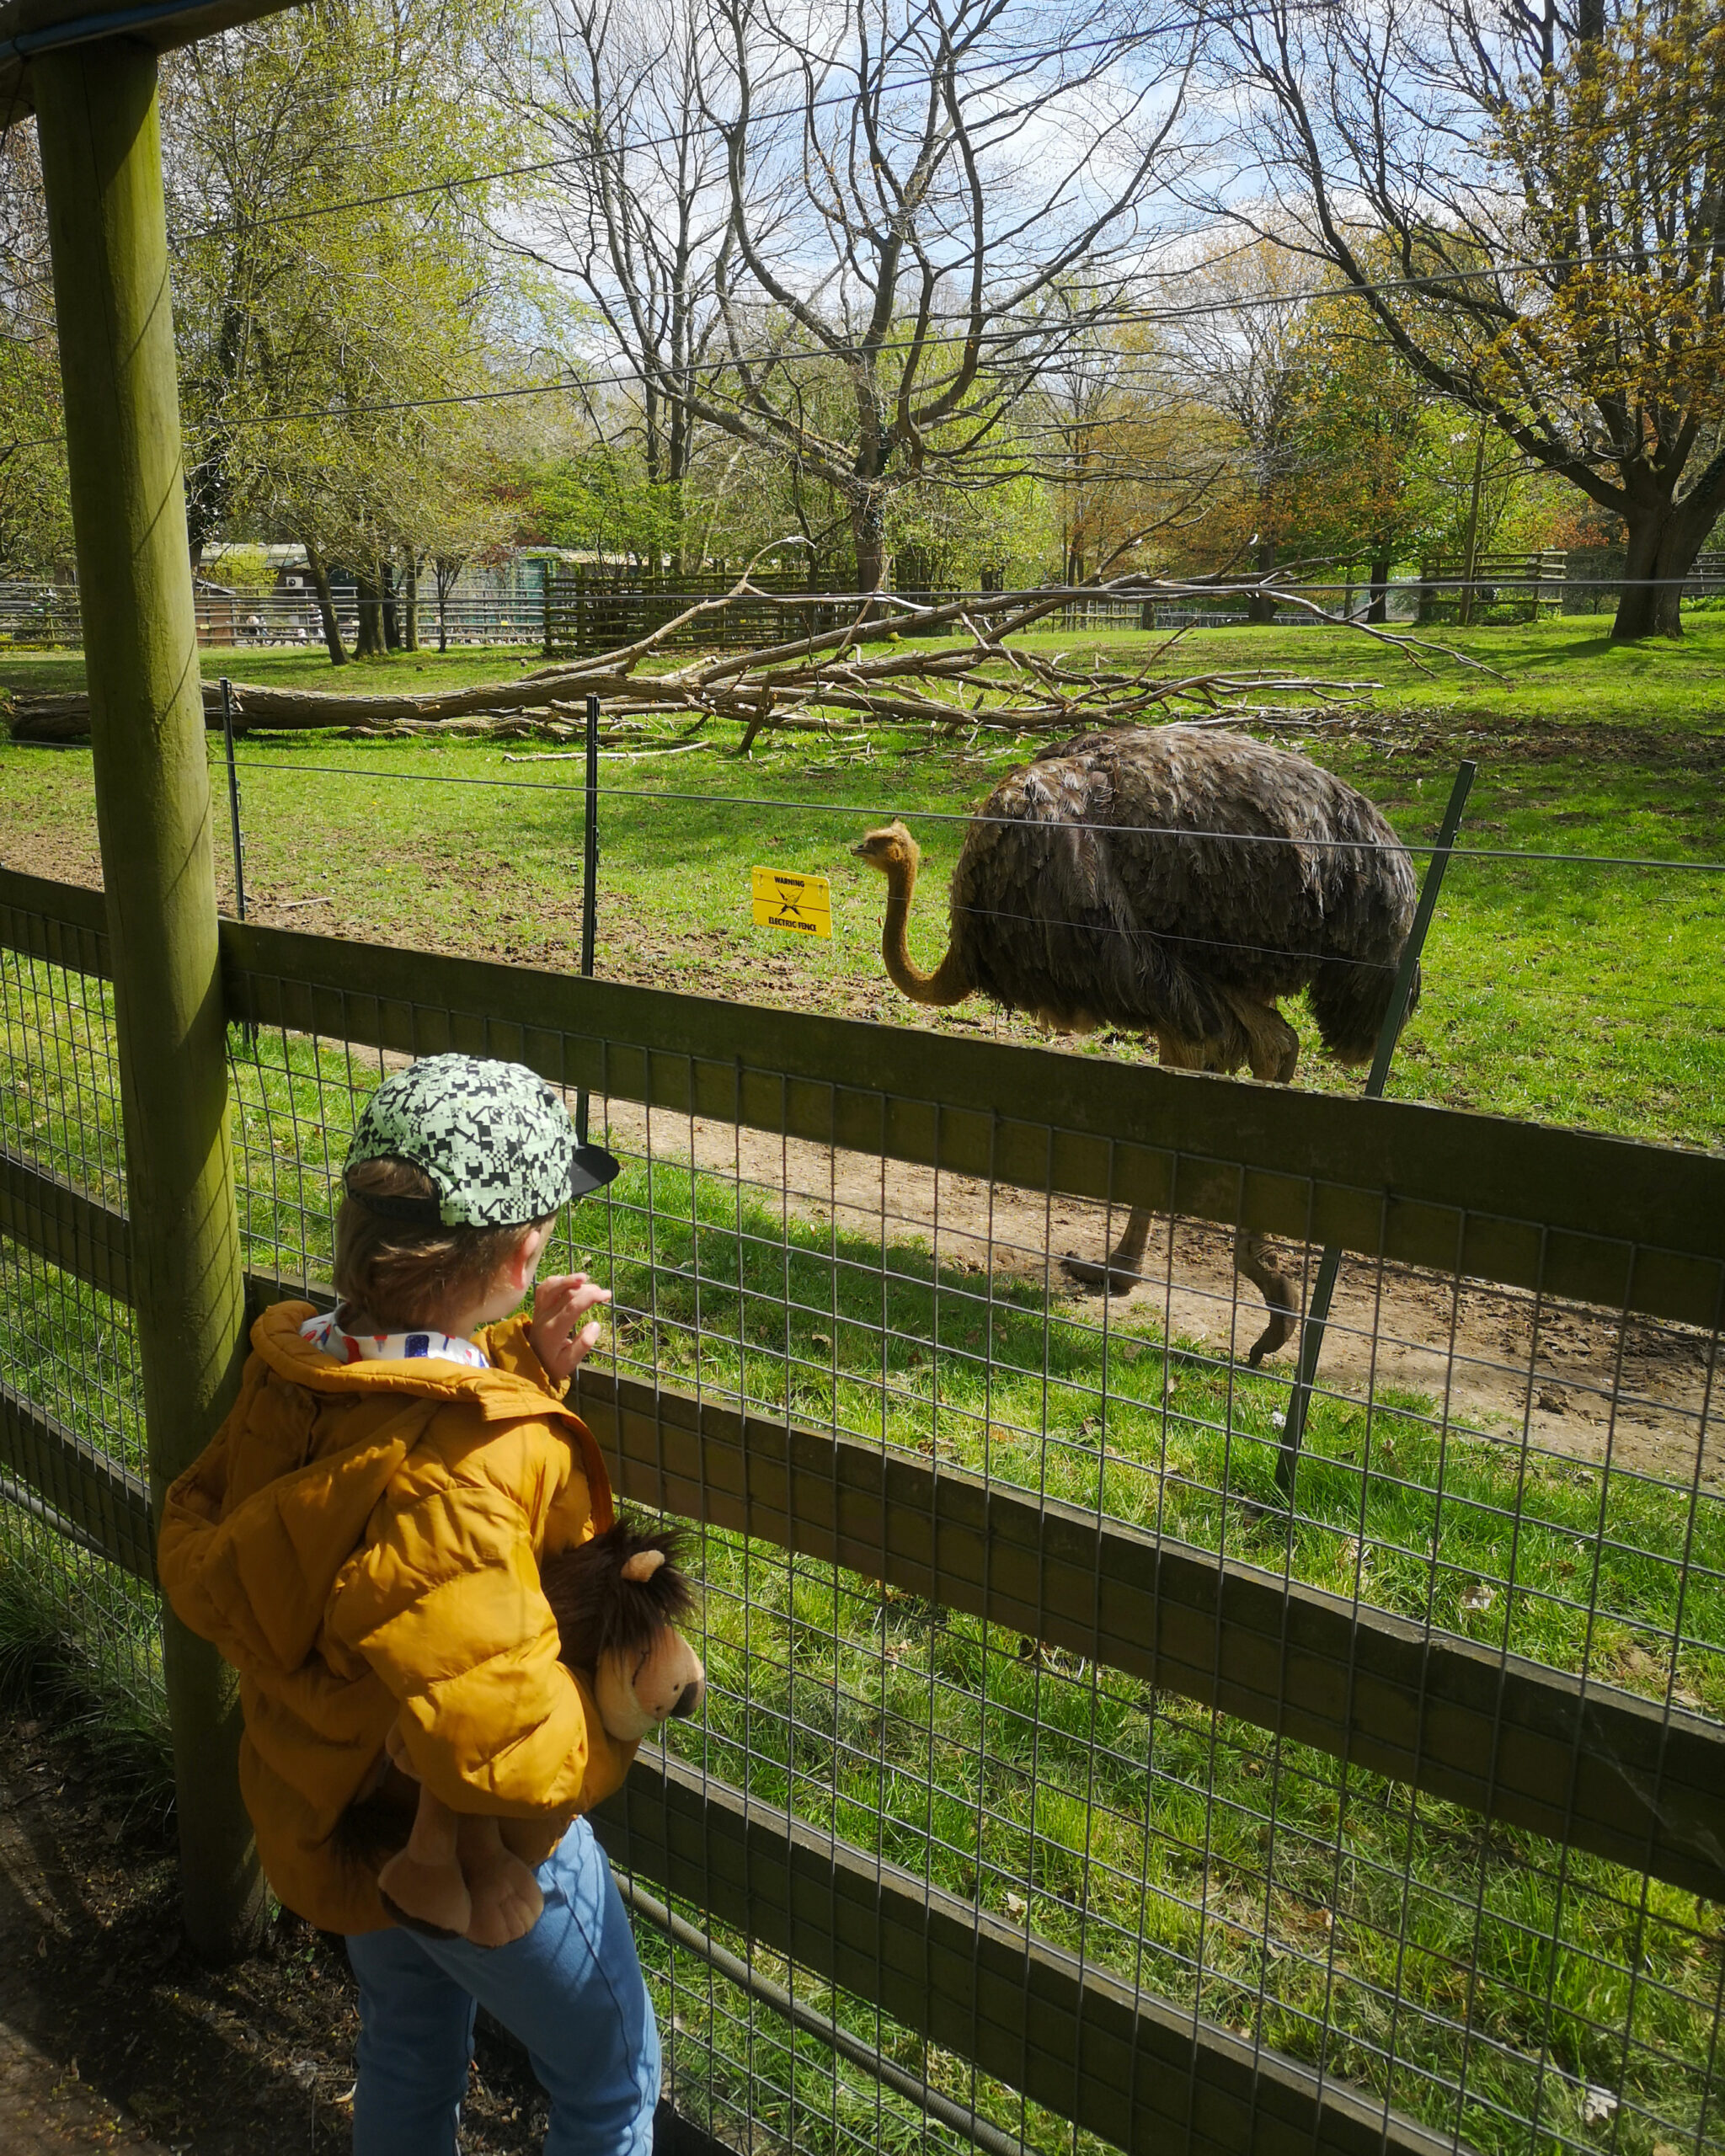 April 2023, Monthly highlights, April 2023 highlights, The Frenchie Mummy, Easter Break, Easter Holiday, Easter Weekend, Crete, Family Time, Life in Kent, Howletts Park, Sandwich